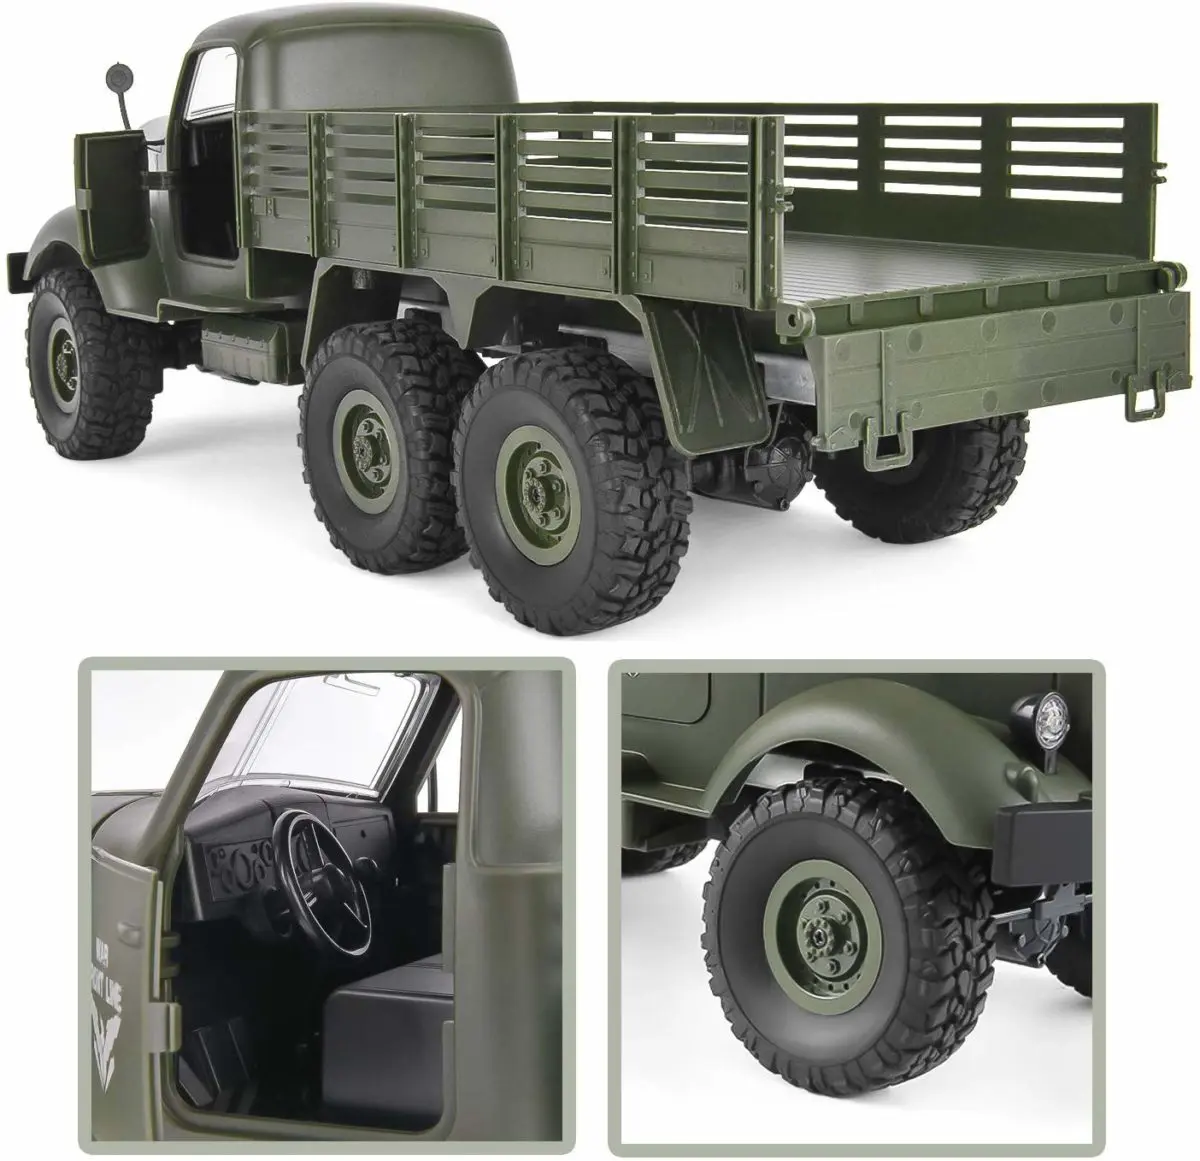 GotechoD RC Truck Remote Control Military Truck - Top Toys and Gifts for Six Year Old Boys 2